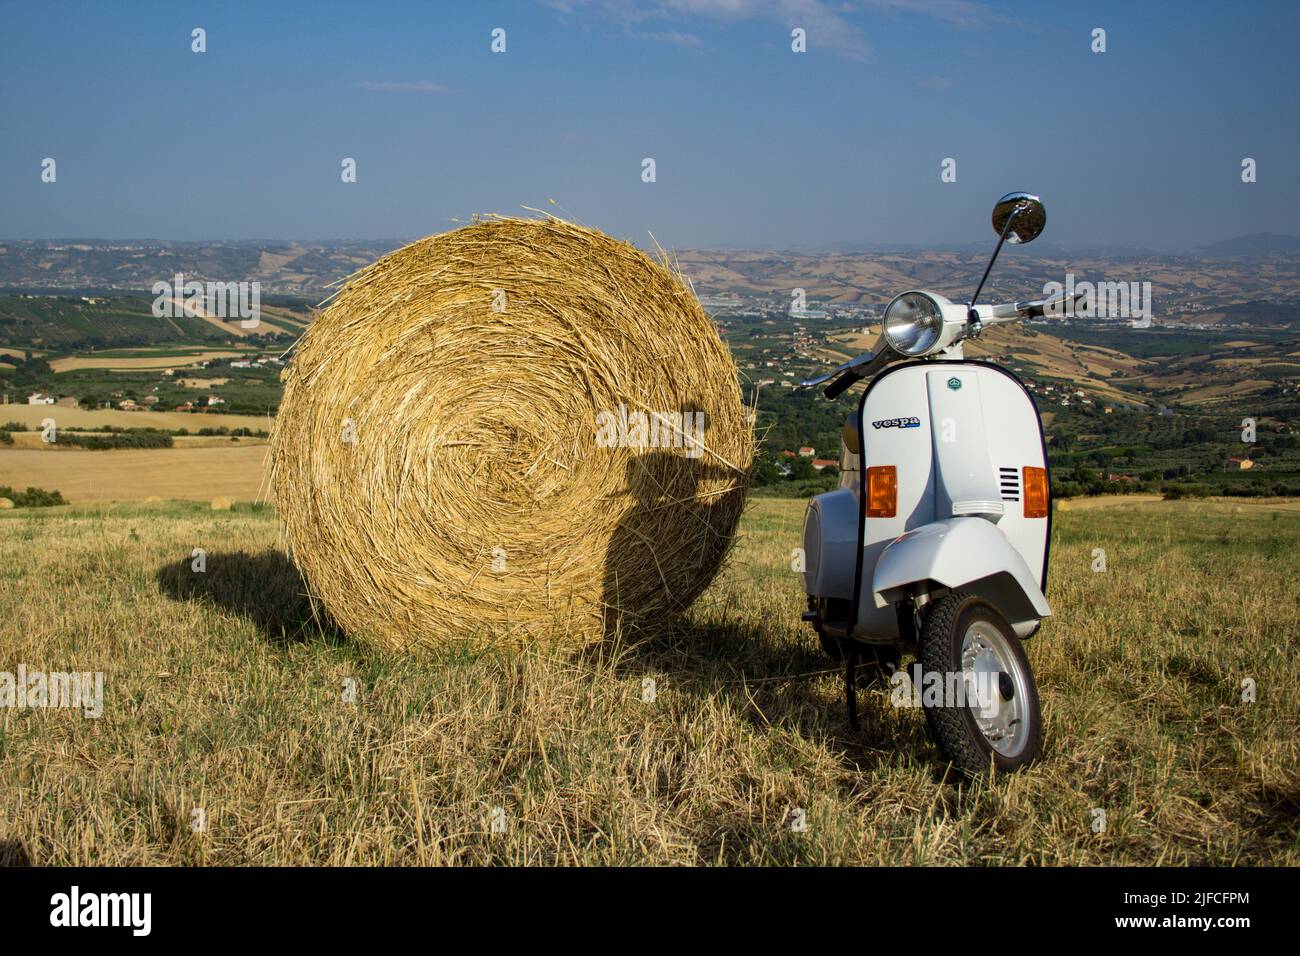 Image of an old Piaggio vespa motorcycle parked in a field with straw bales and stunning view in the background. Date 29-06-2022 Florence Italy Stock Photo